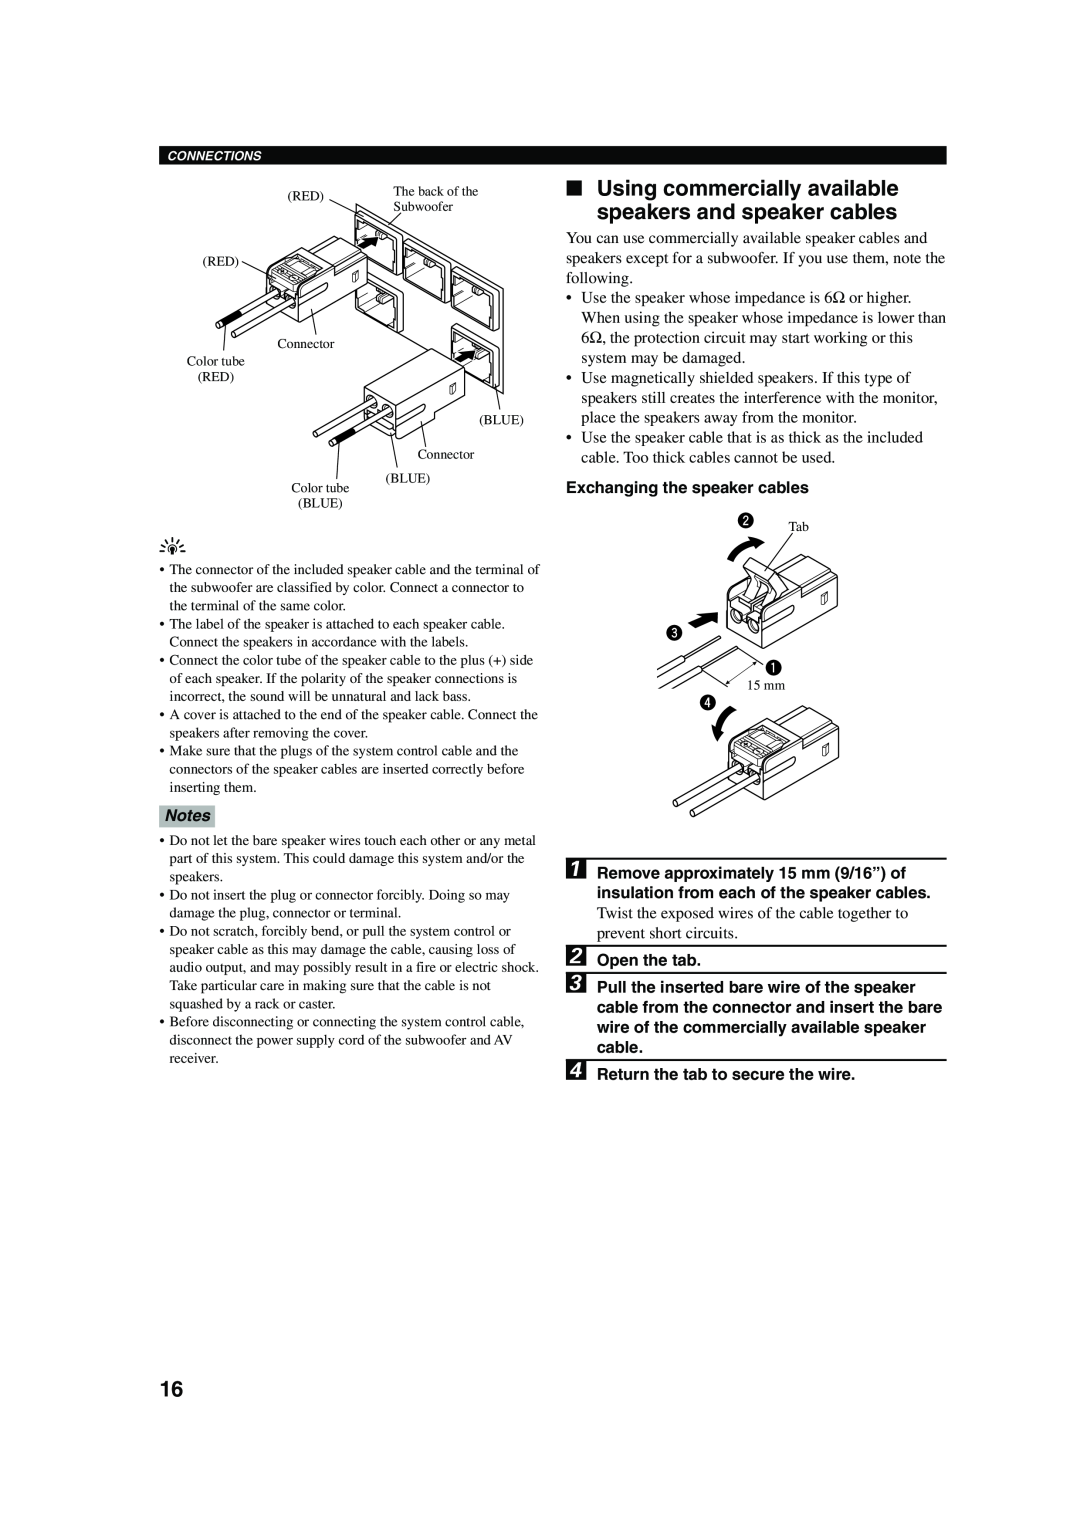 Yamaha AVX-S80 owner manual Notes, Exchanging the speaker cables, Open the tab, Return the tab to secure the wire 